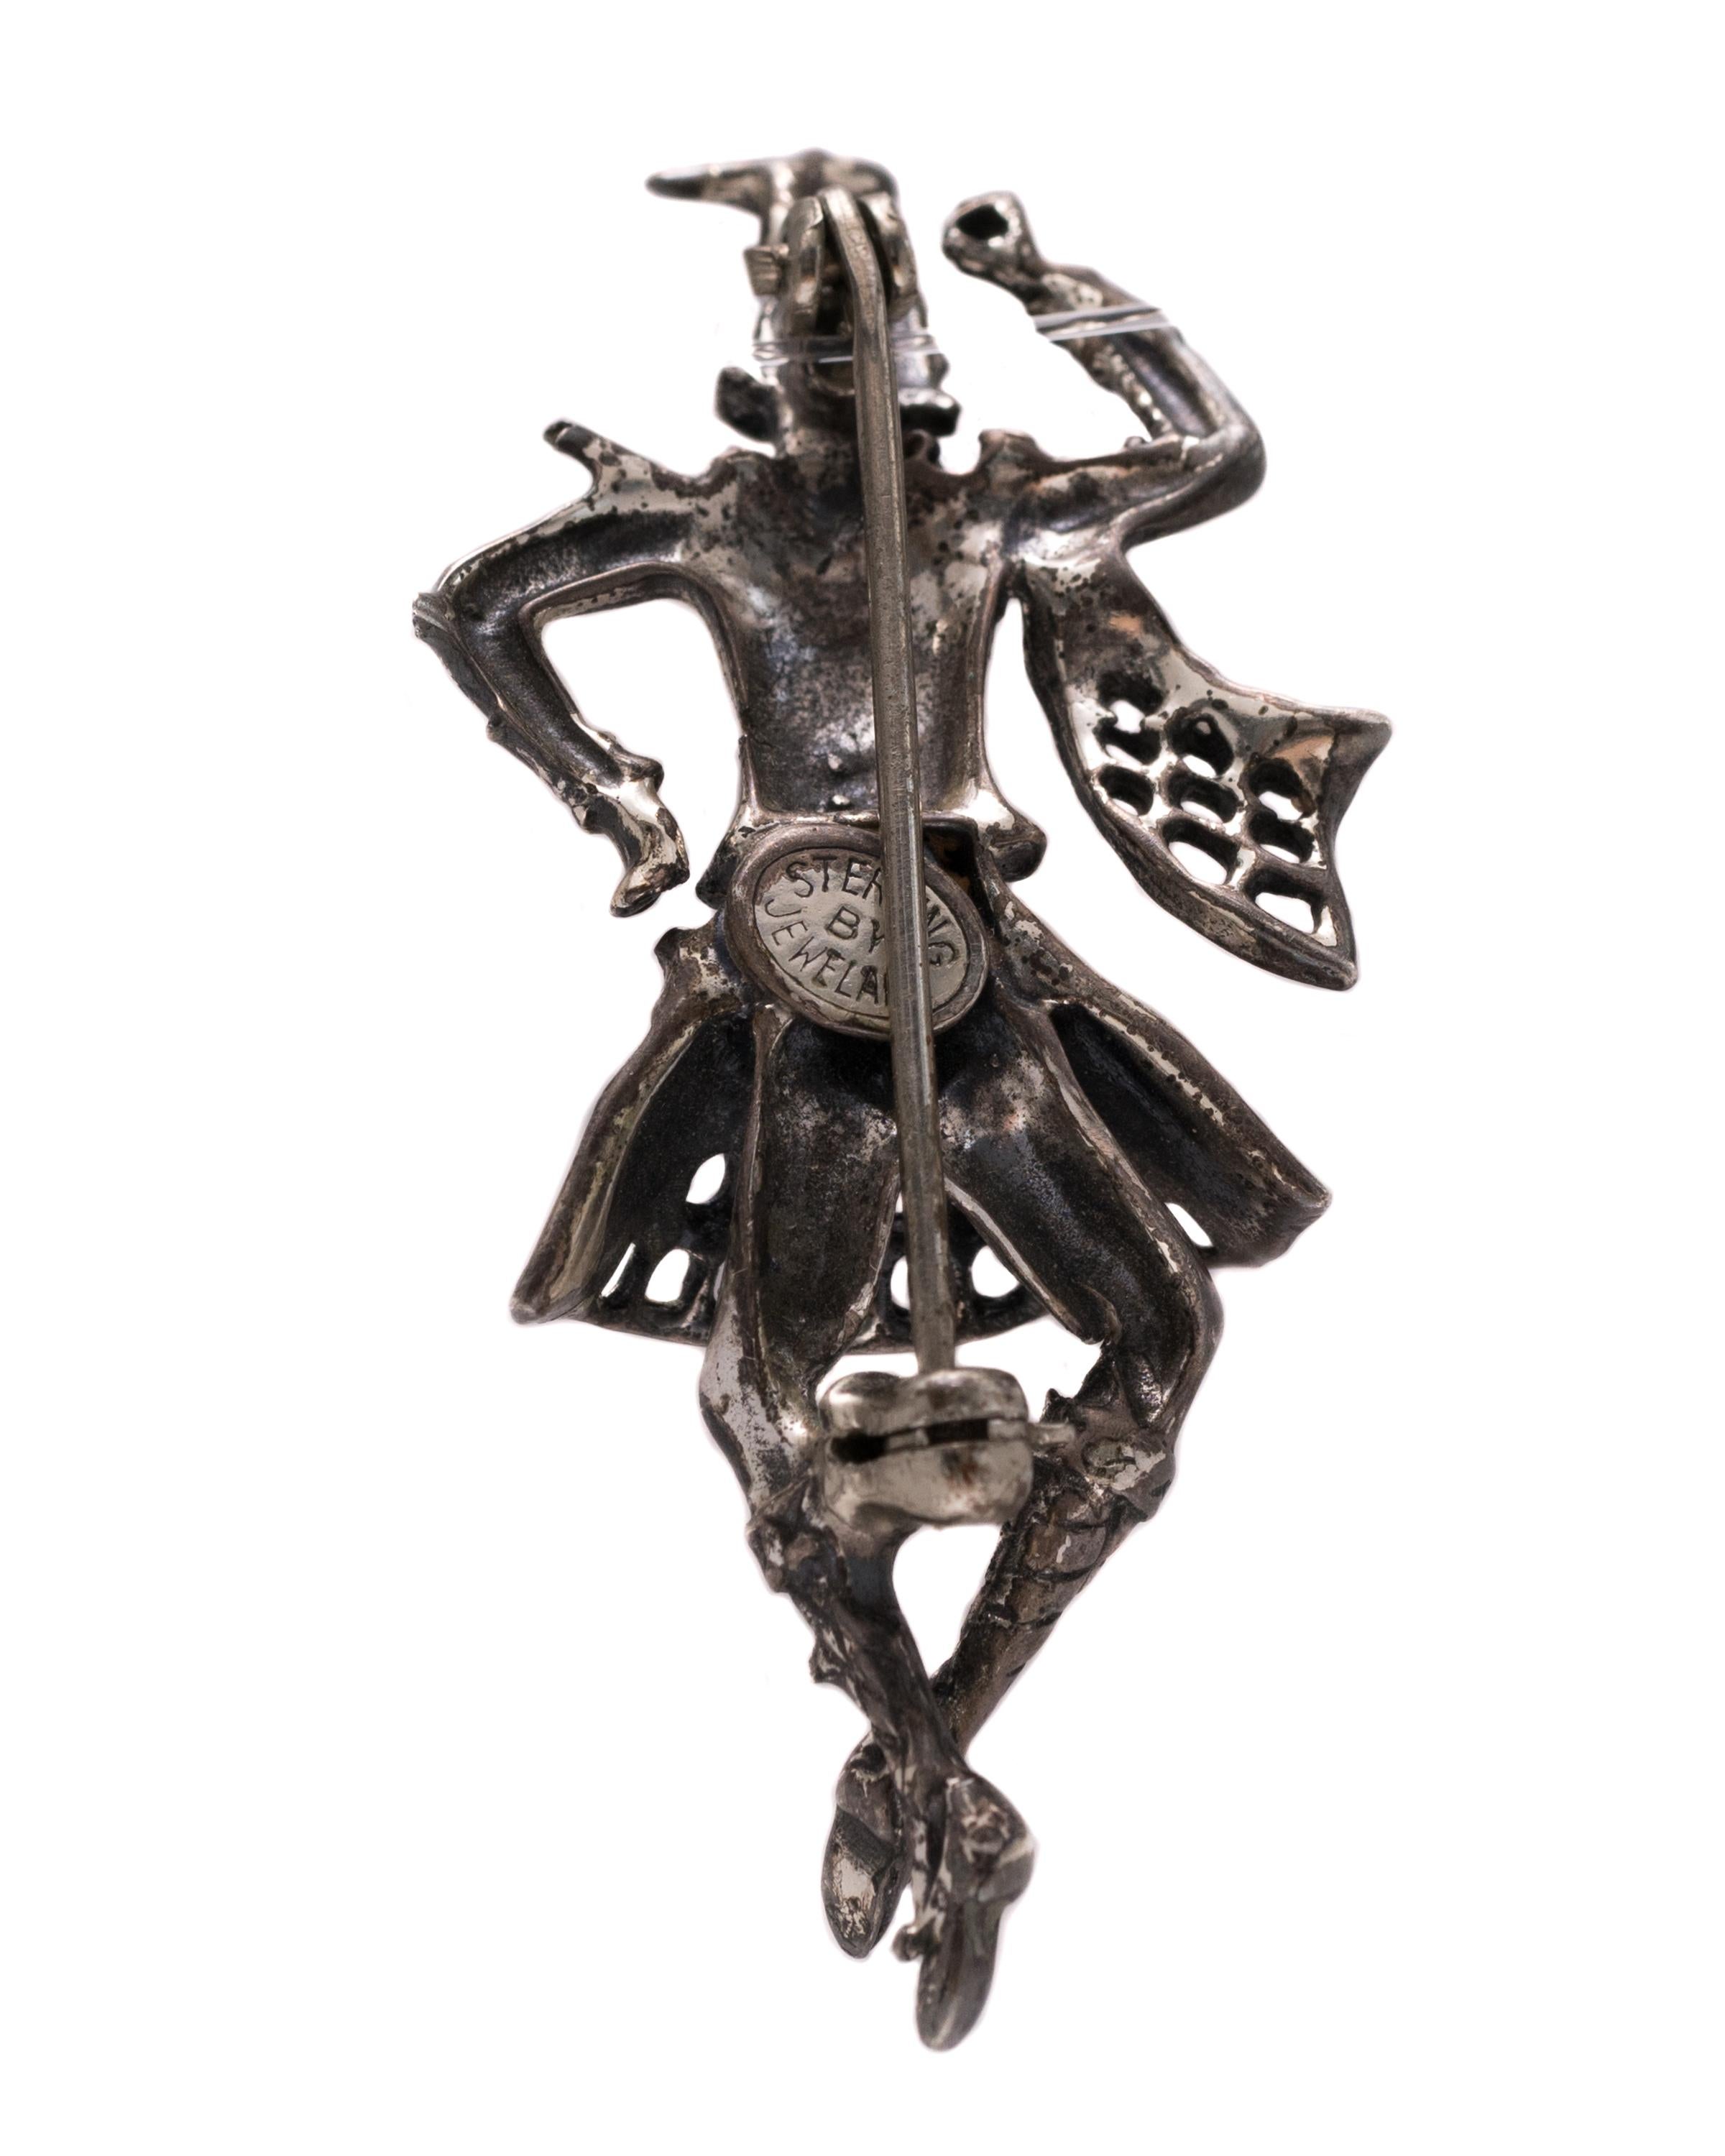 1946 Retro Collectible Scottish Highlander Dancer Pin - Sterling Silver

Features:
Exquisitely Detailed throughout
Crafted by Jewel Art Company of Providence Rhode, Island
Crafted from Sterling Silver
Pin measures 5 x 2.5 centimeters, 1.3